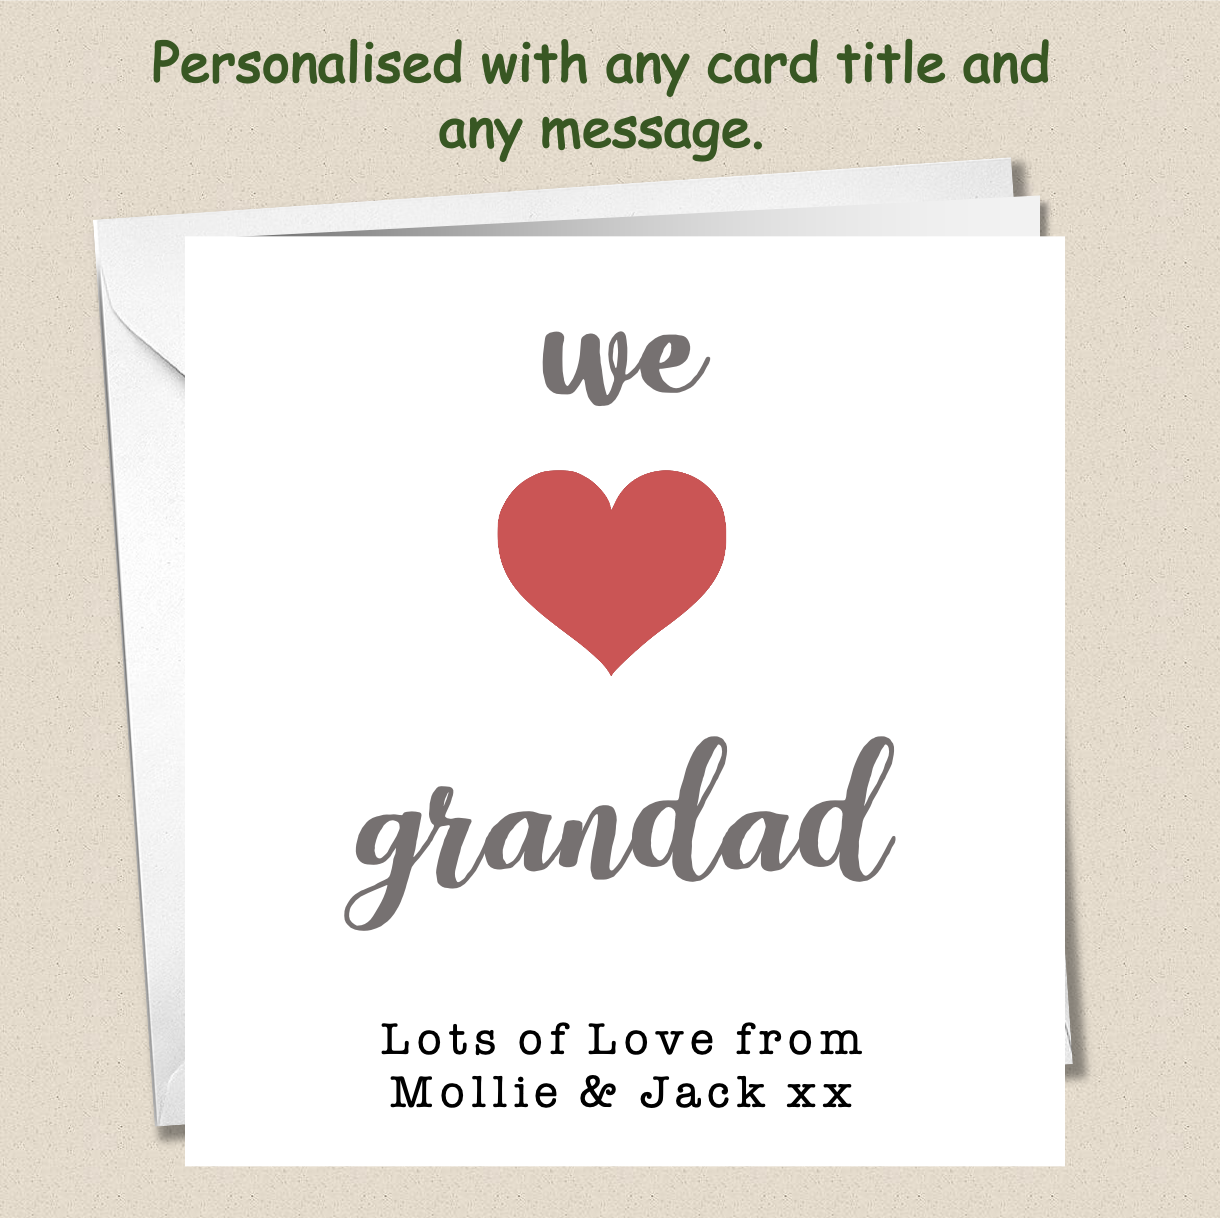 Personalised Father's Day Card - I heart Daddy